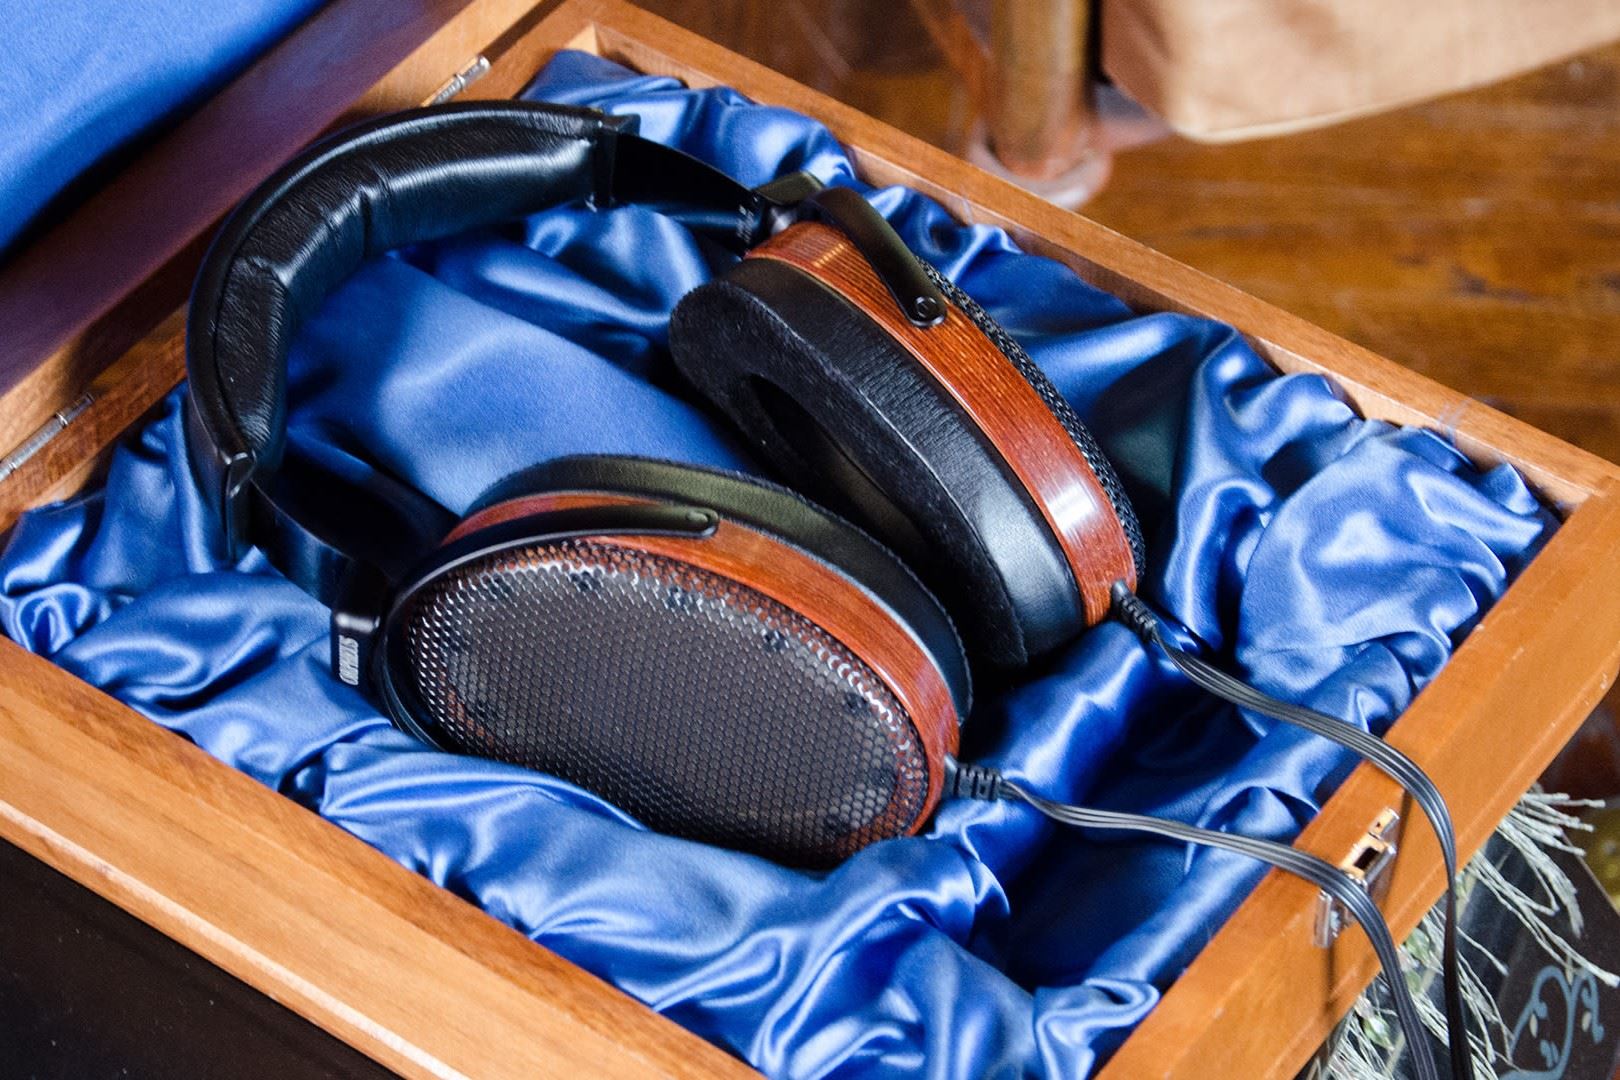 The World’s Most Expensive Headsets: A List